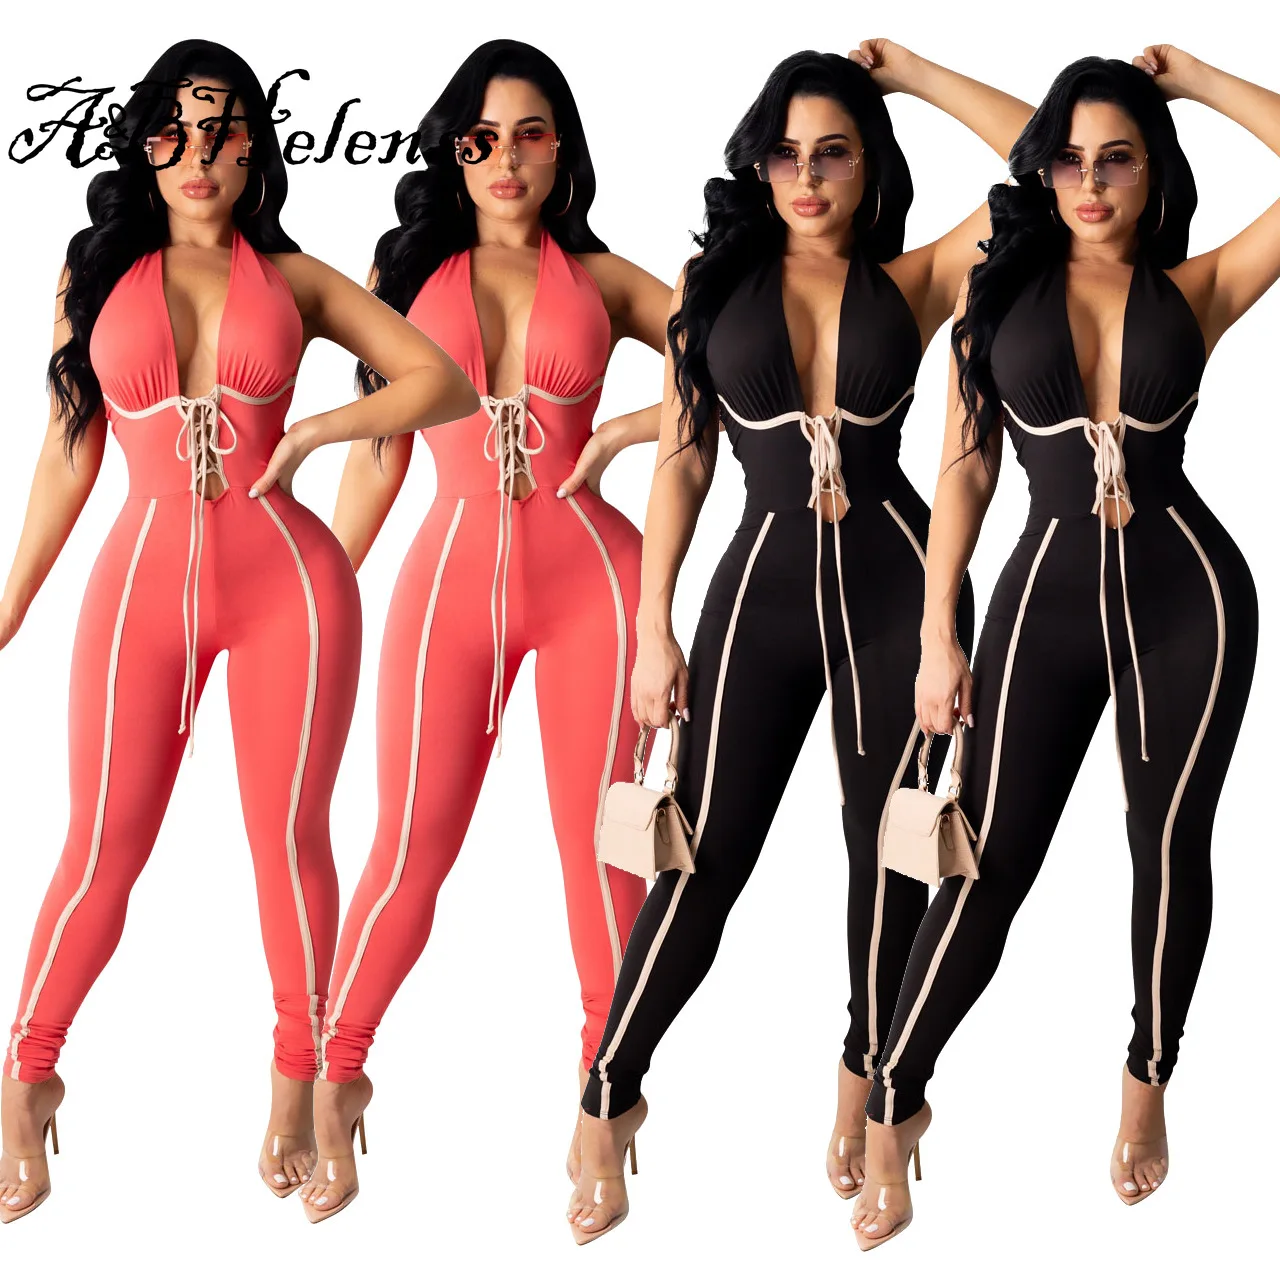 

A&BHelenss Halter Body Jumpsuit Women Summer Sexy Deep V Neck Backless Lace Up Bandage Pants Bodycon Club Party Jumpsuit